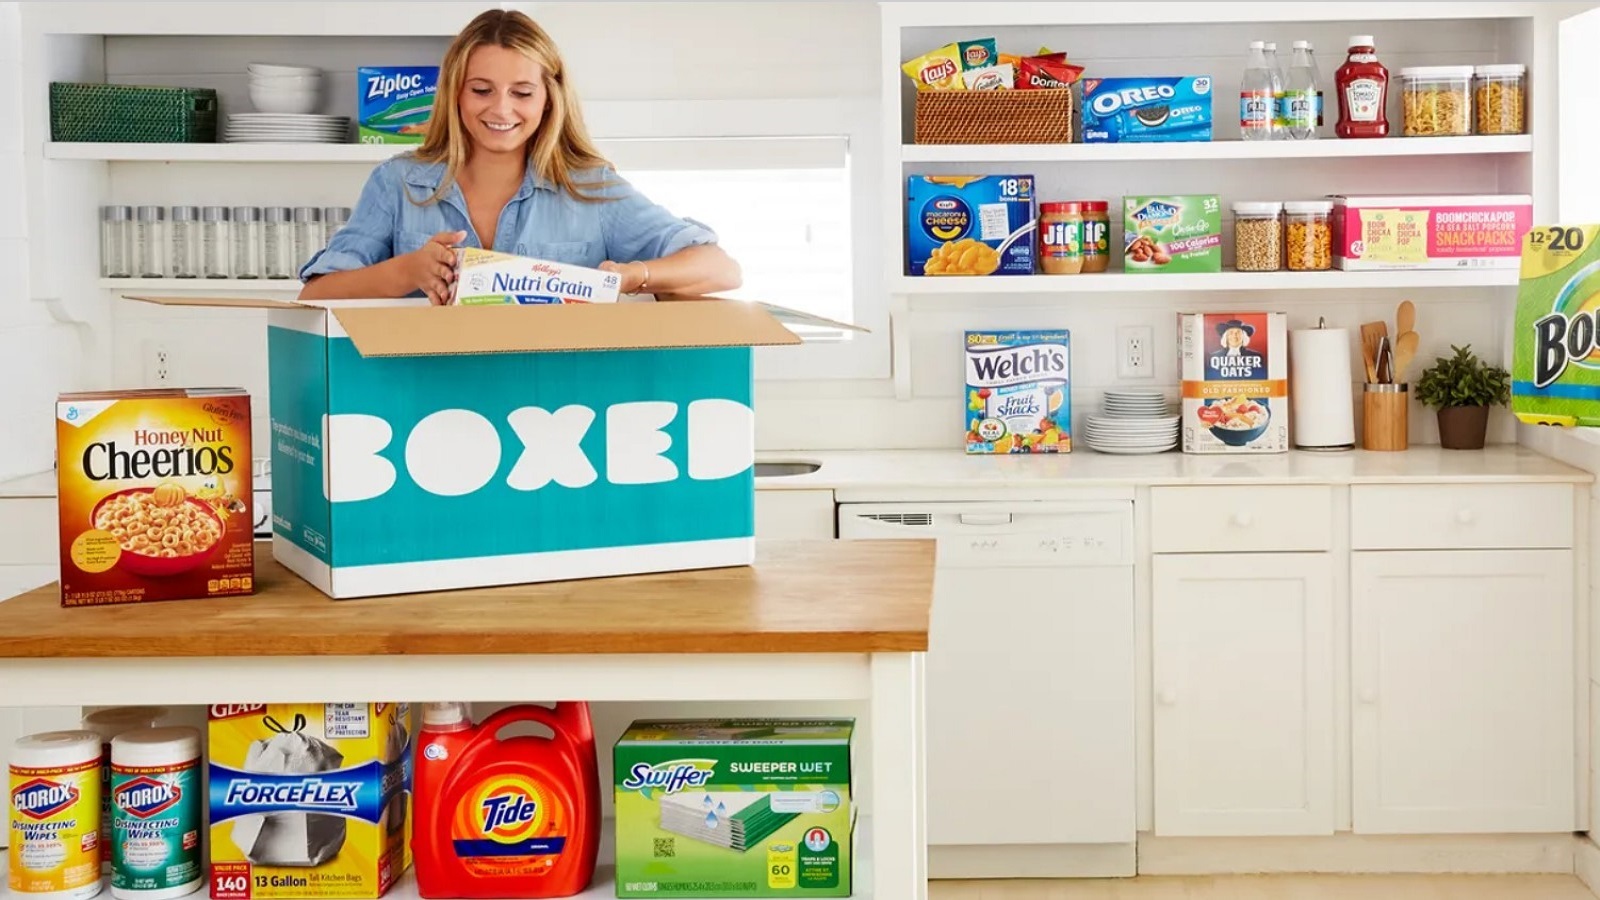 Boxed Review: Does It Really Save You Money on Household Goods?